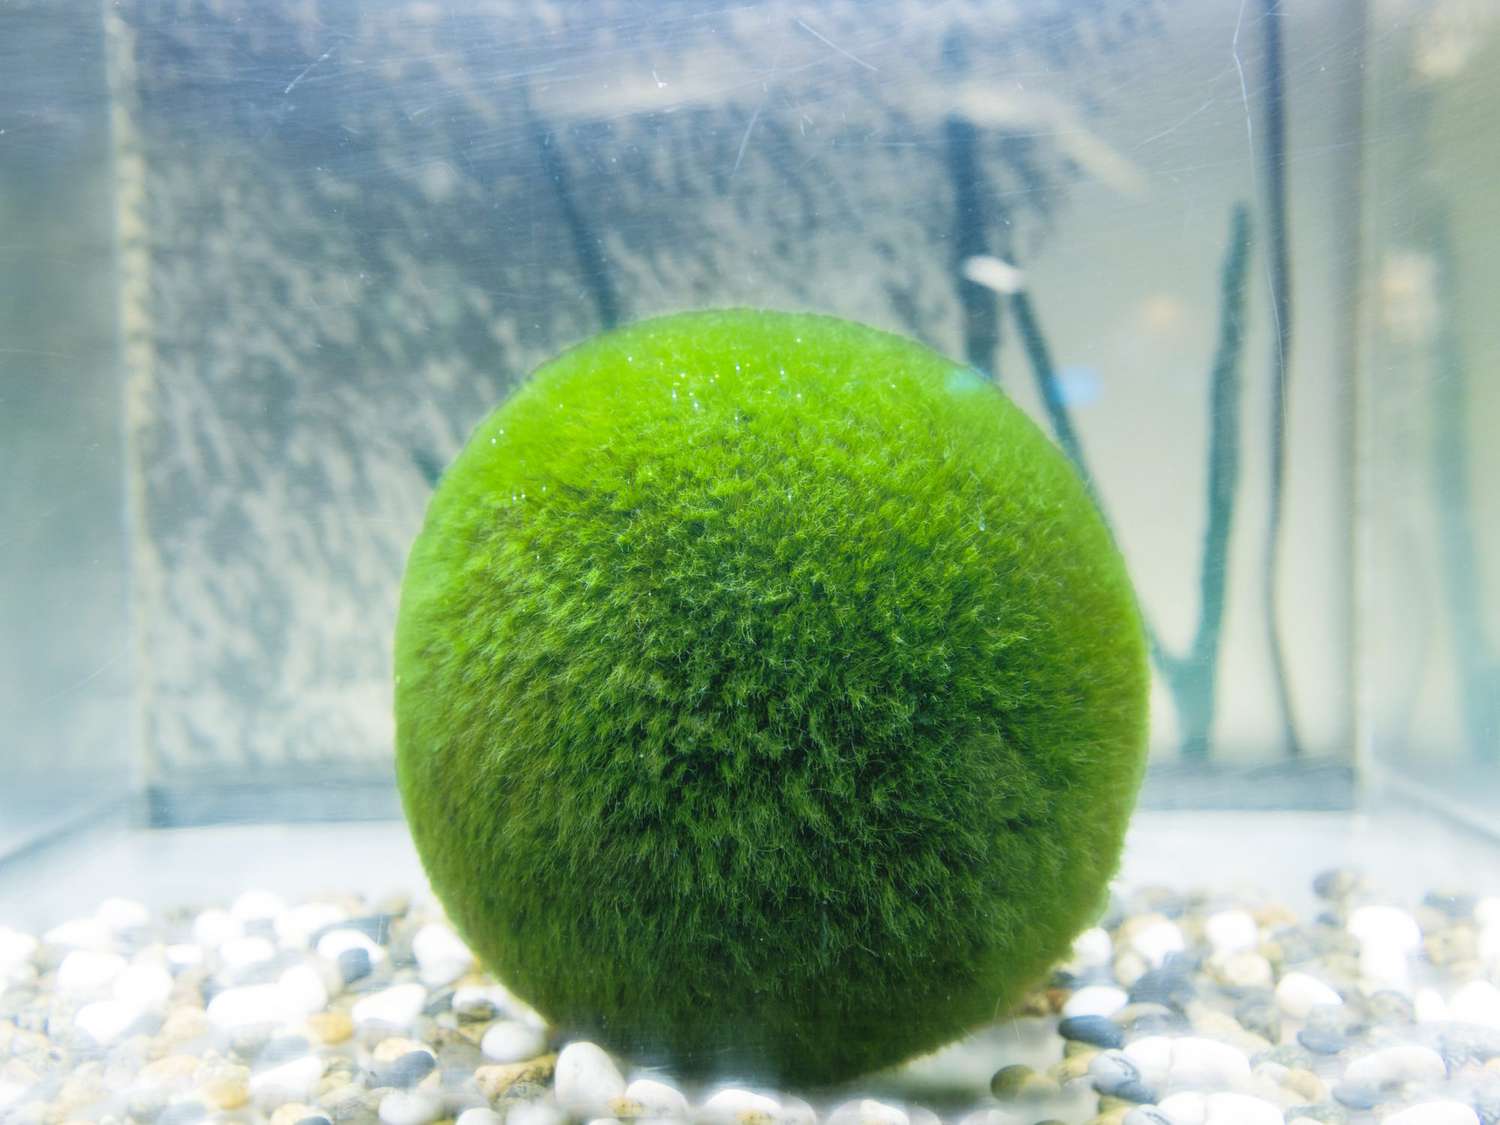 keep in water.Grow slower than cactus EASY! MossBall-rare live plant